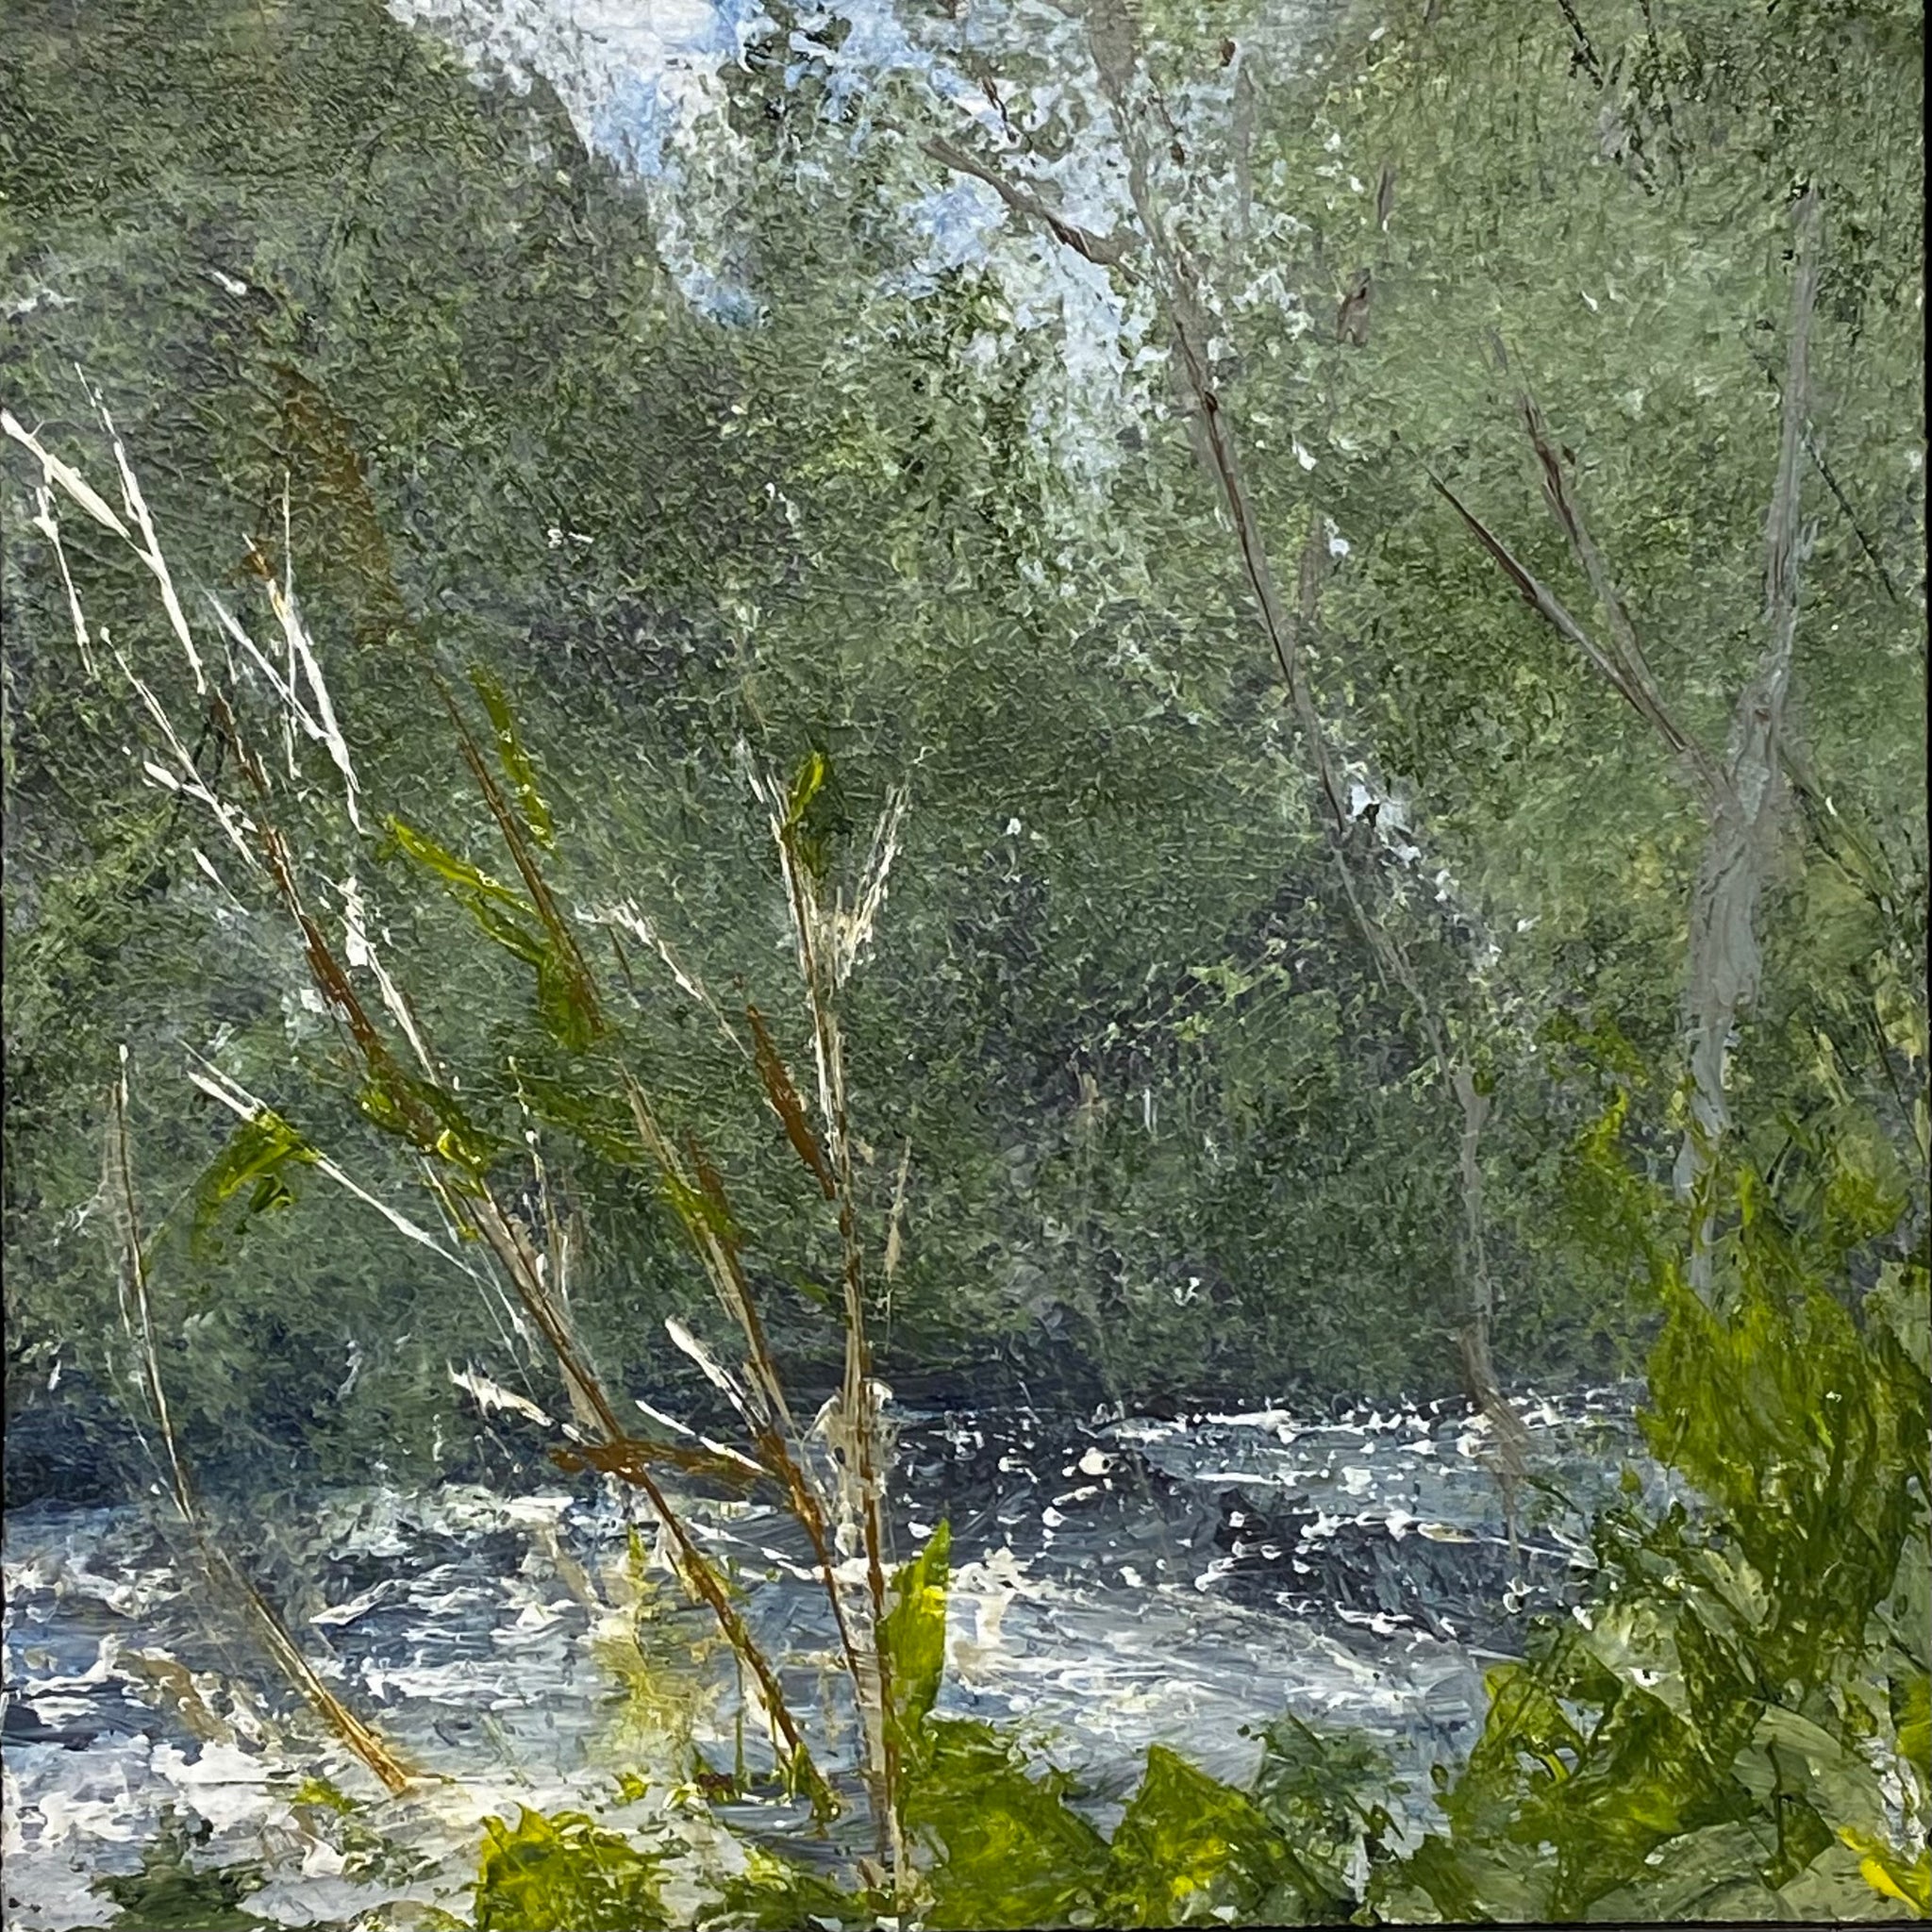 Juanita Bellavance, Secrets of the river, From the Spring portfolio, 2021, Acrylic on panel, 6 x 6 inches